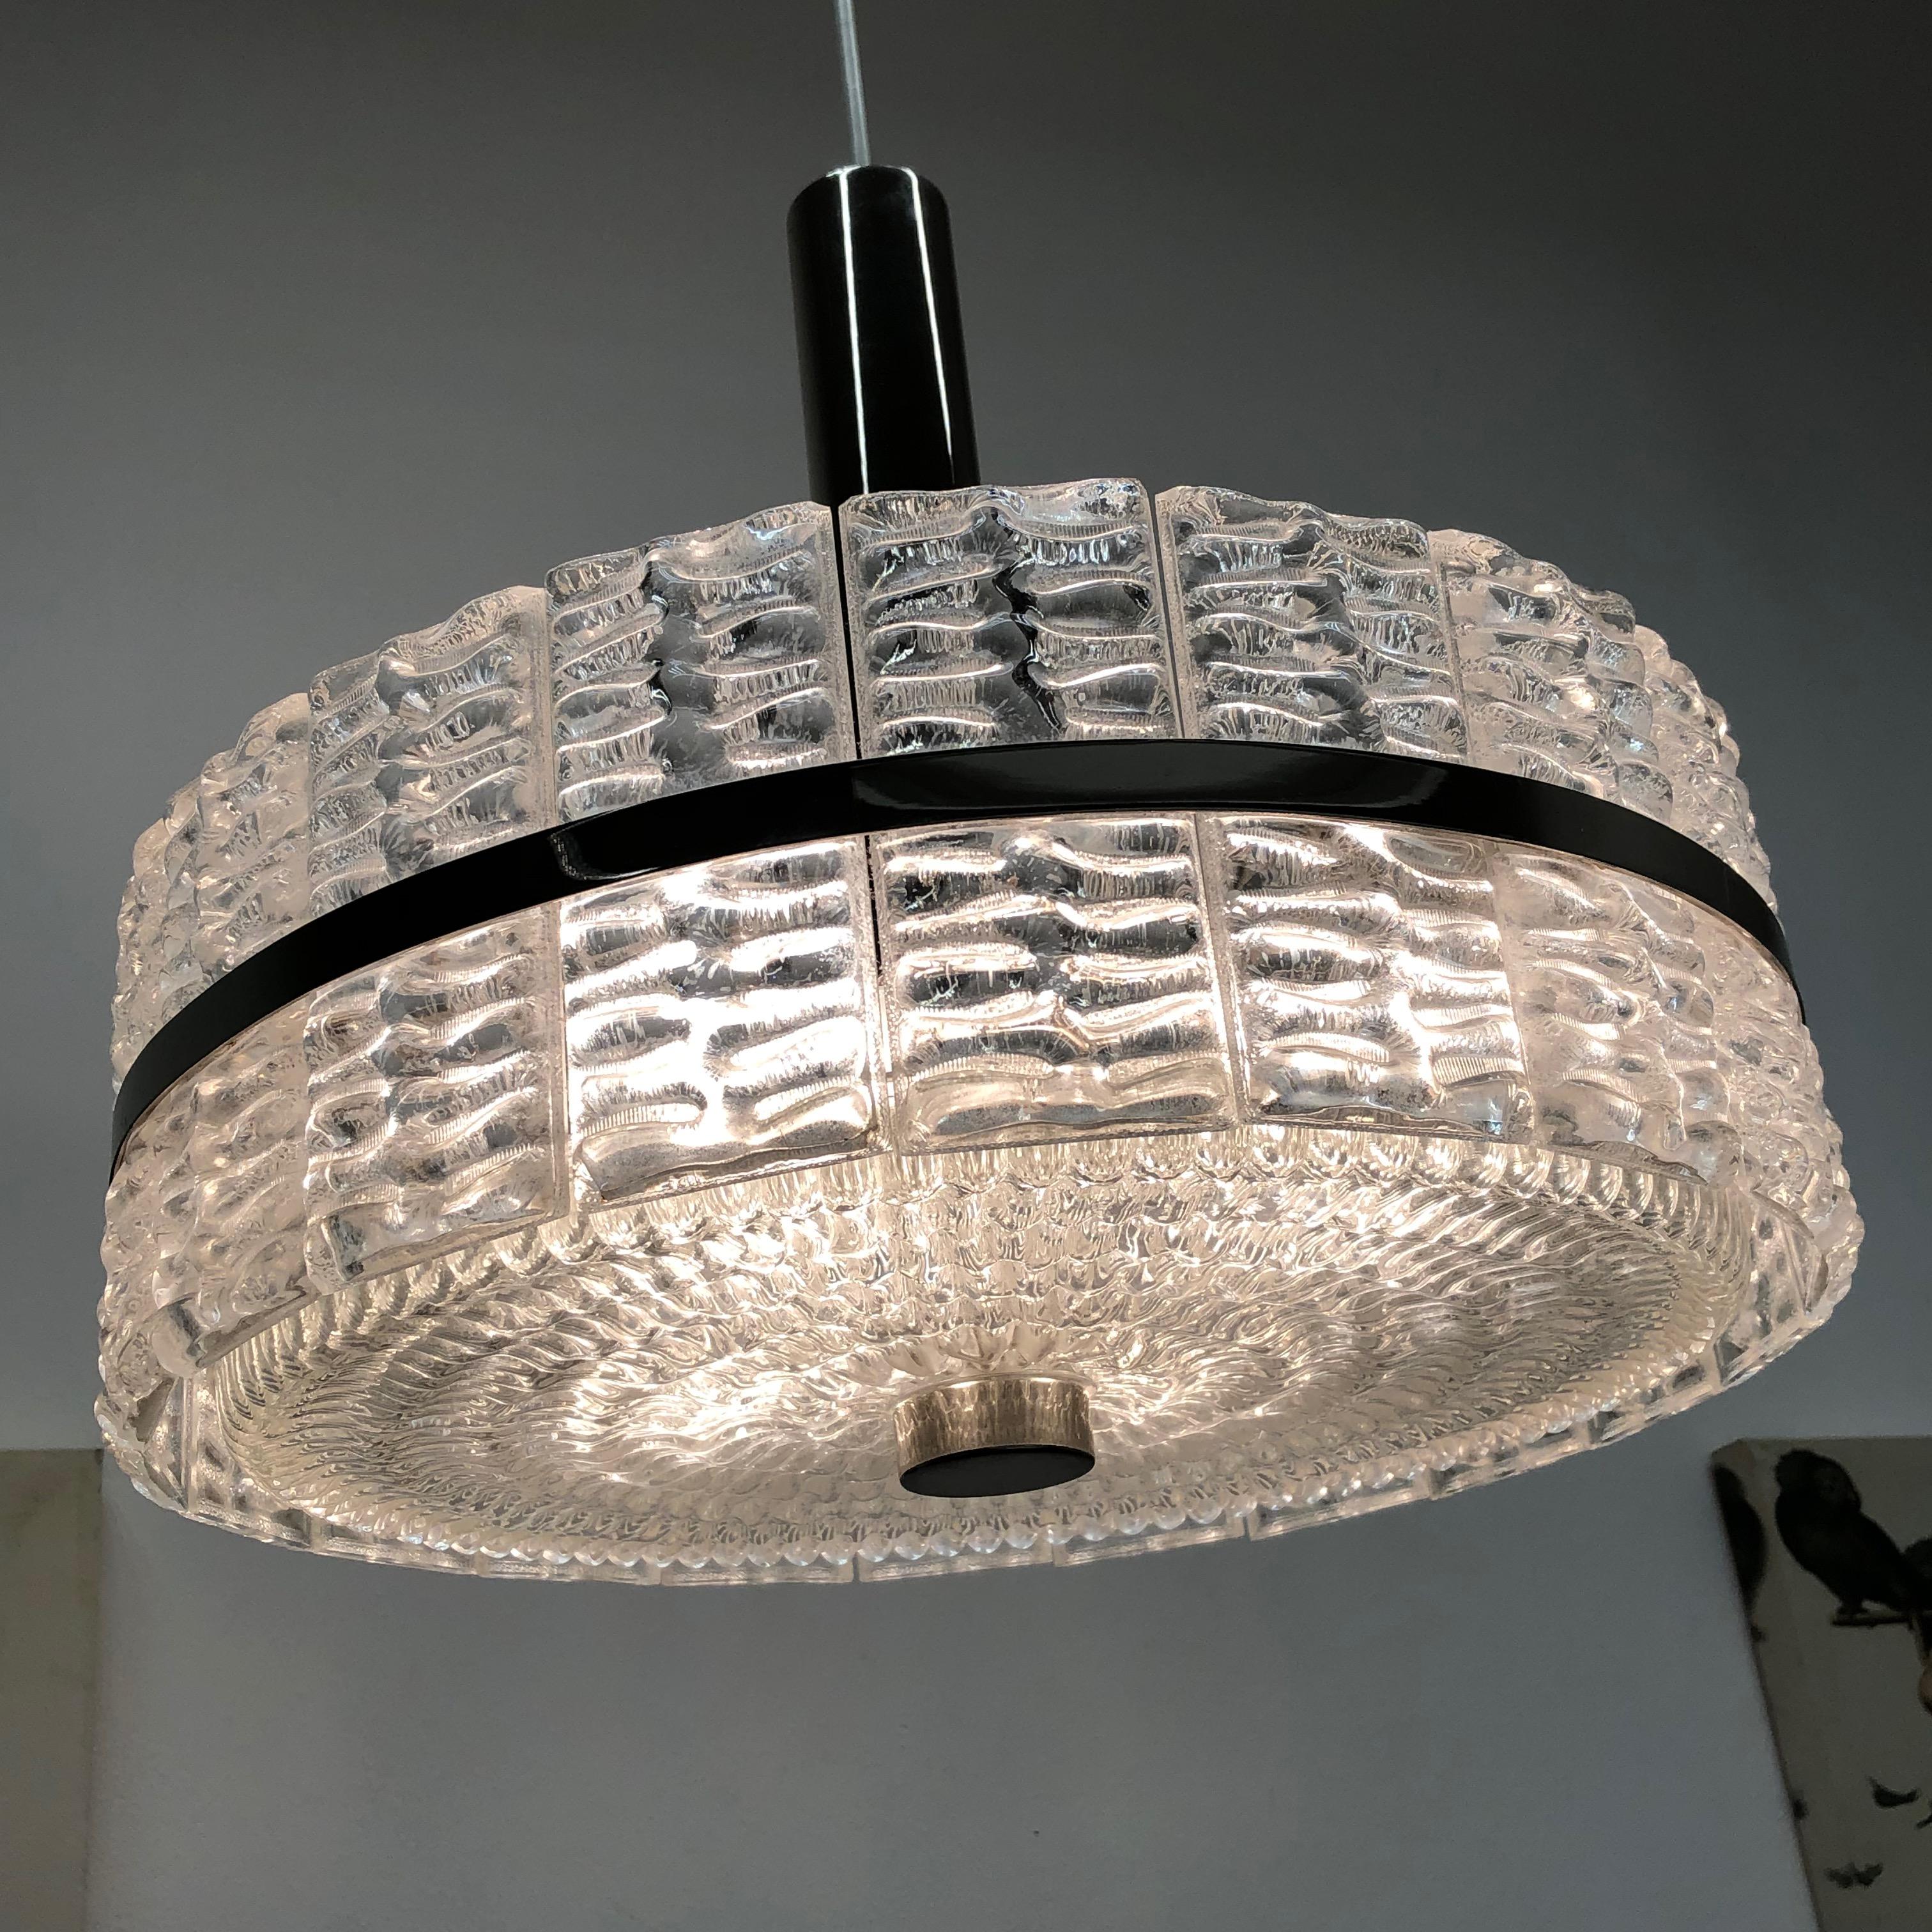 Chrome and Glass Chandelier Pendant Lamp, Austria, 1970s For Sale 4